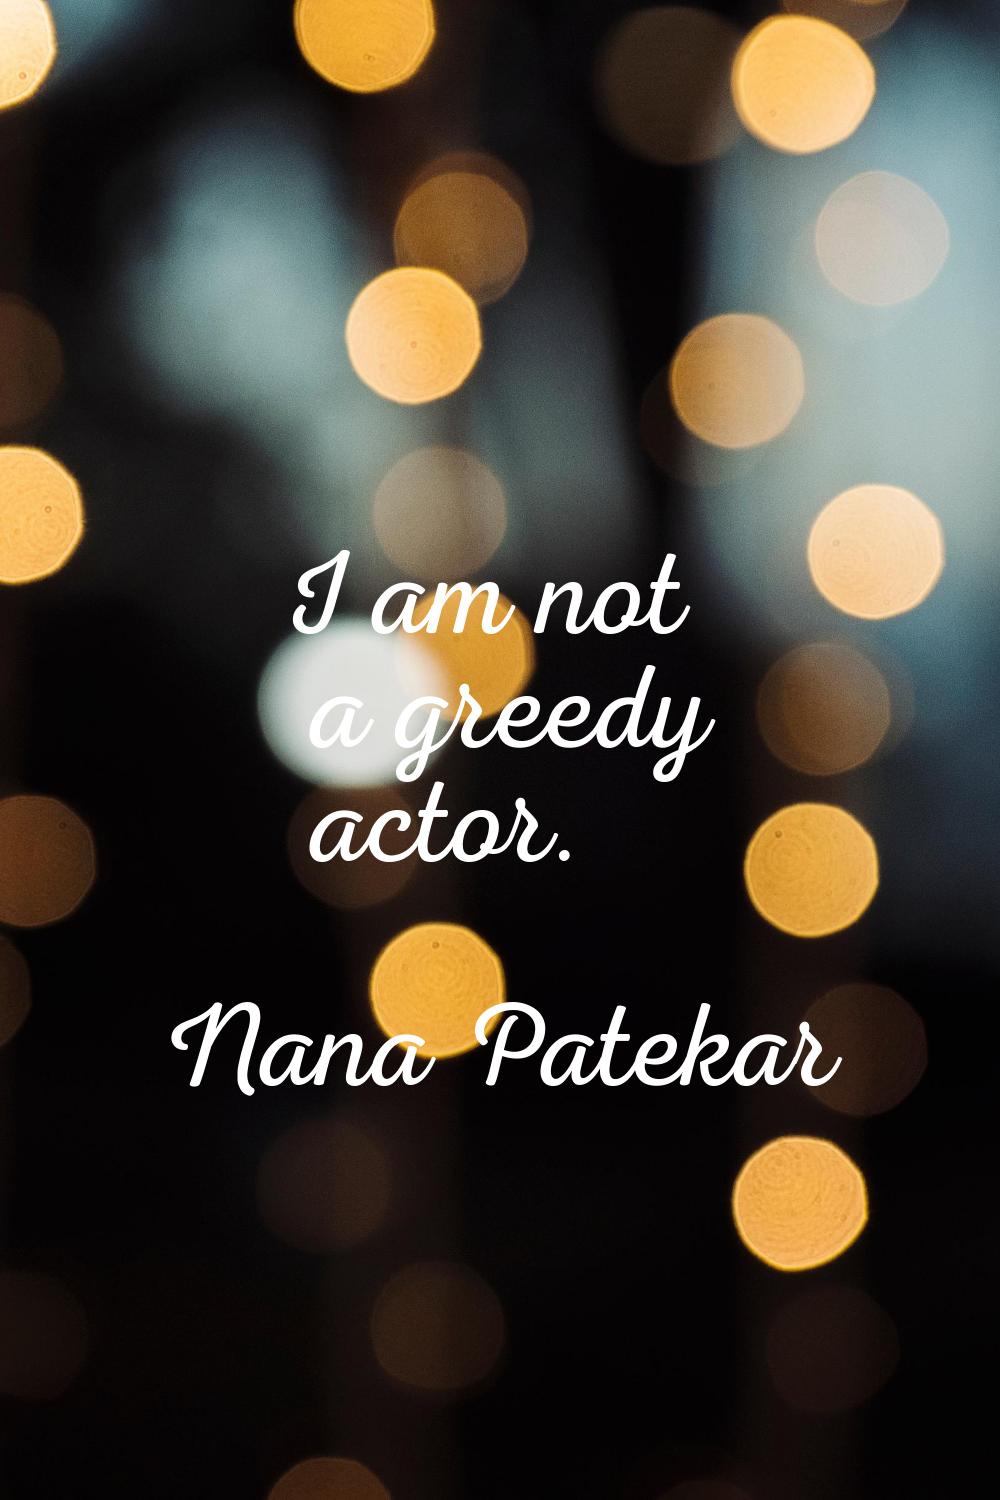 I am not a greedy actor.